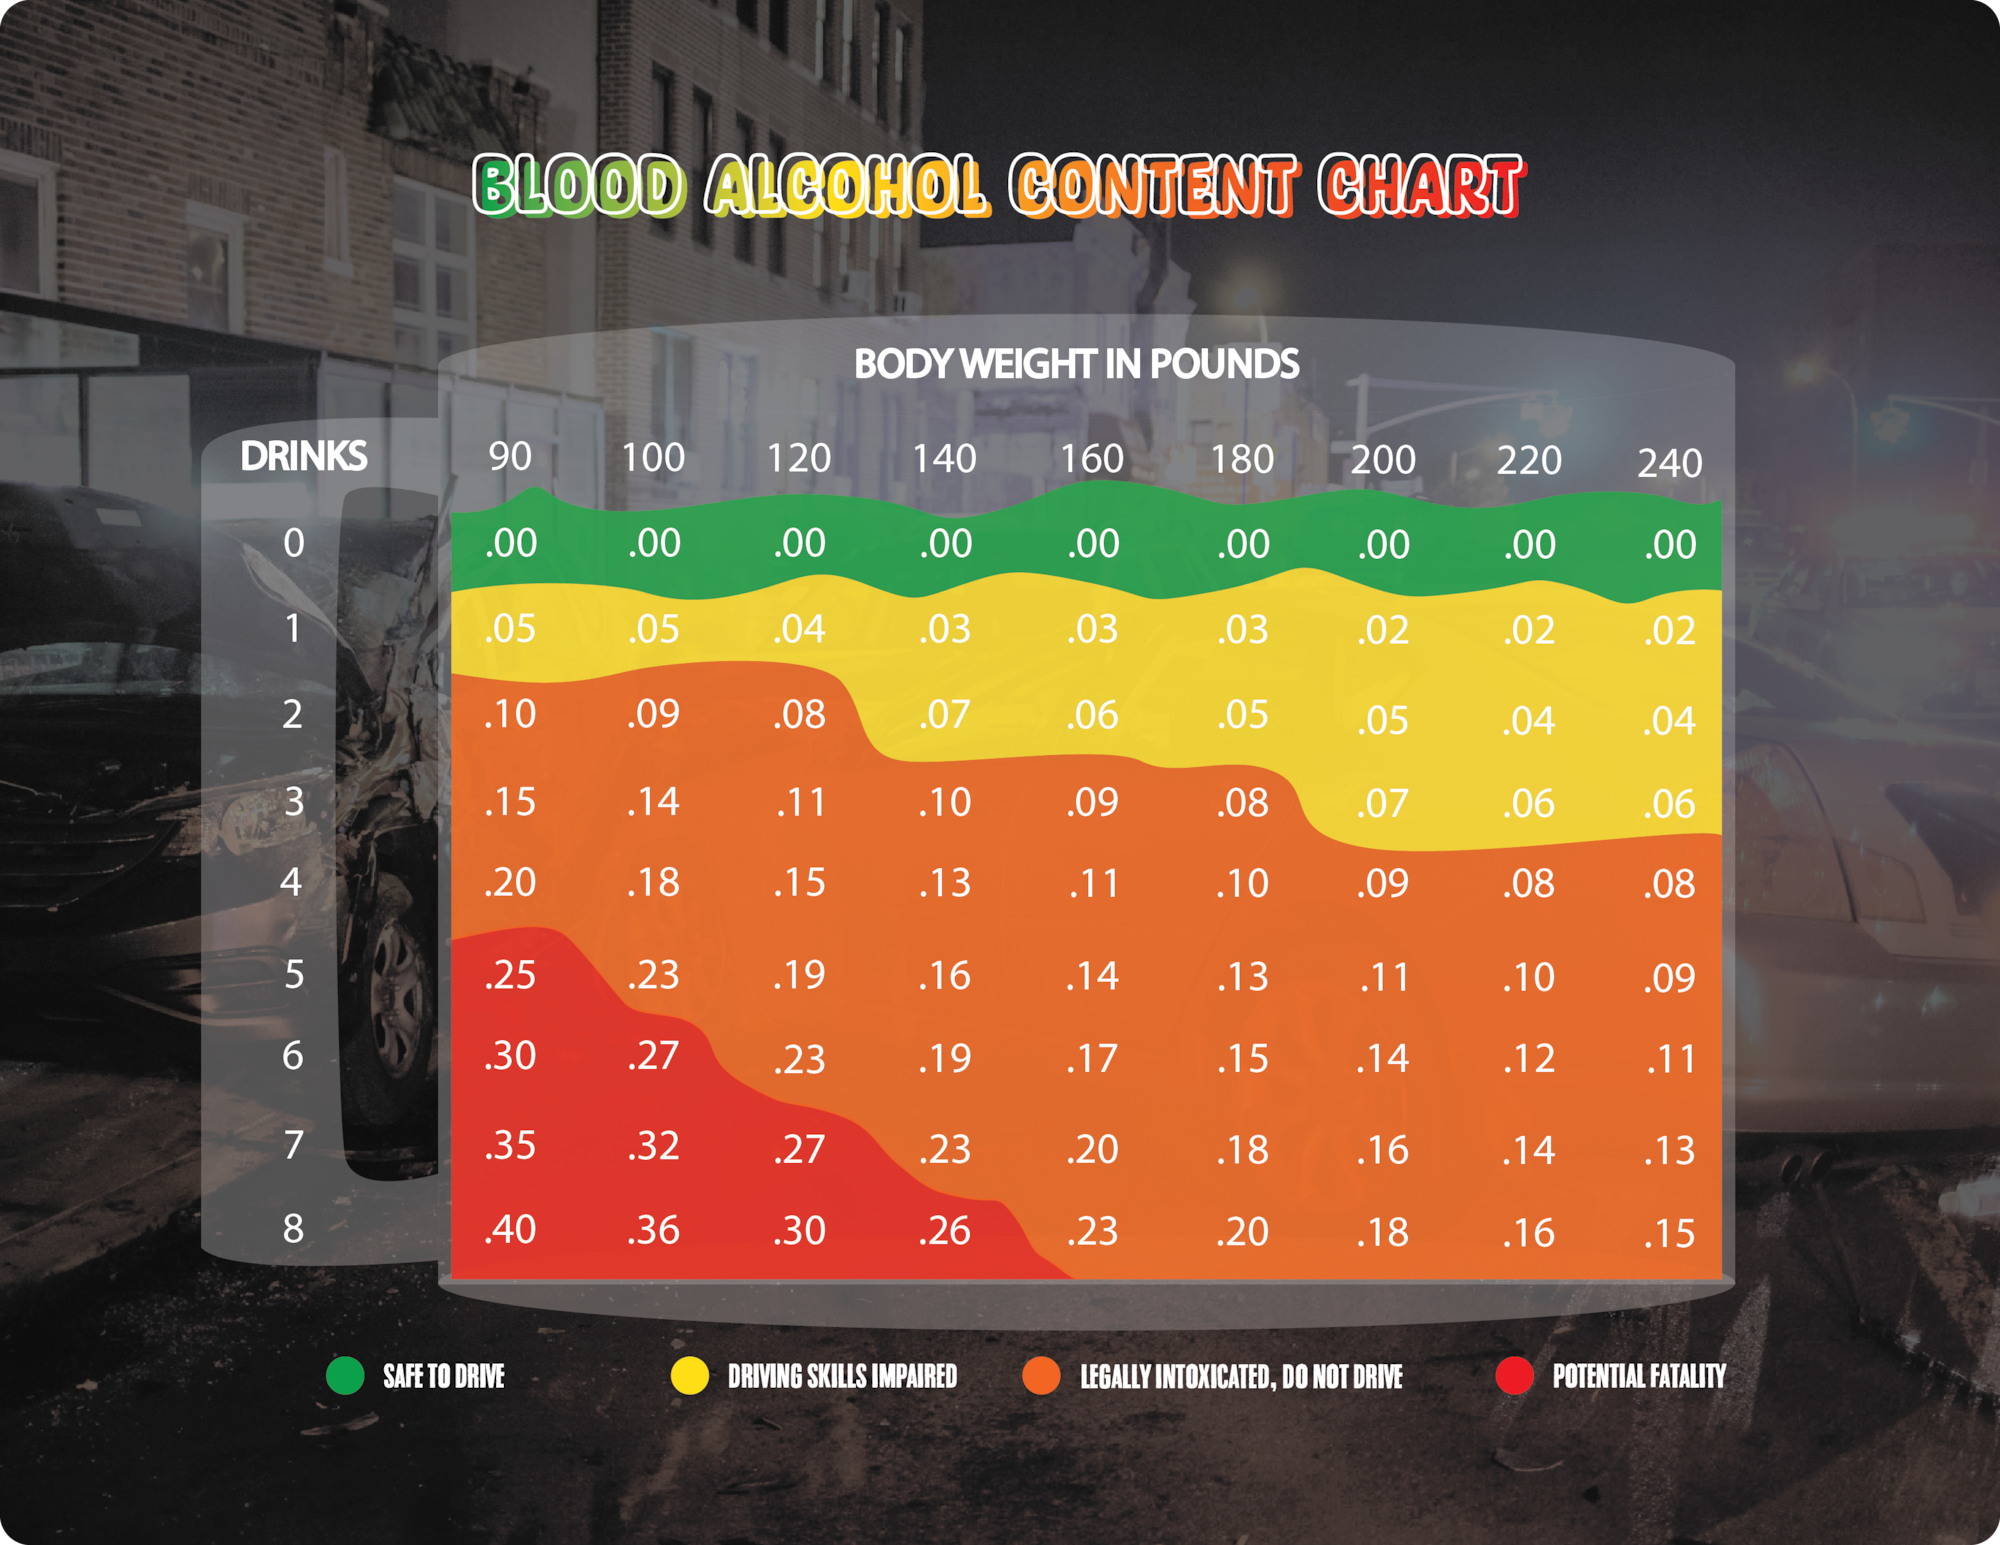 Graphic created by Airman 1st Class Kailee Reynolds containing a blood alcohol content chart.